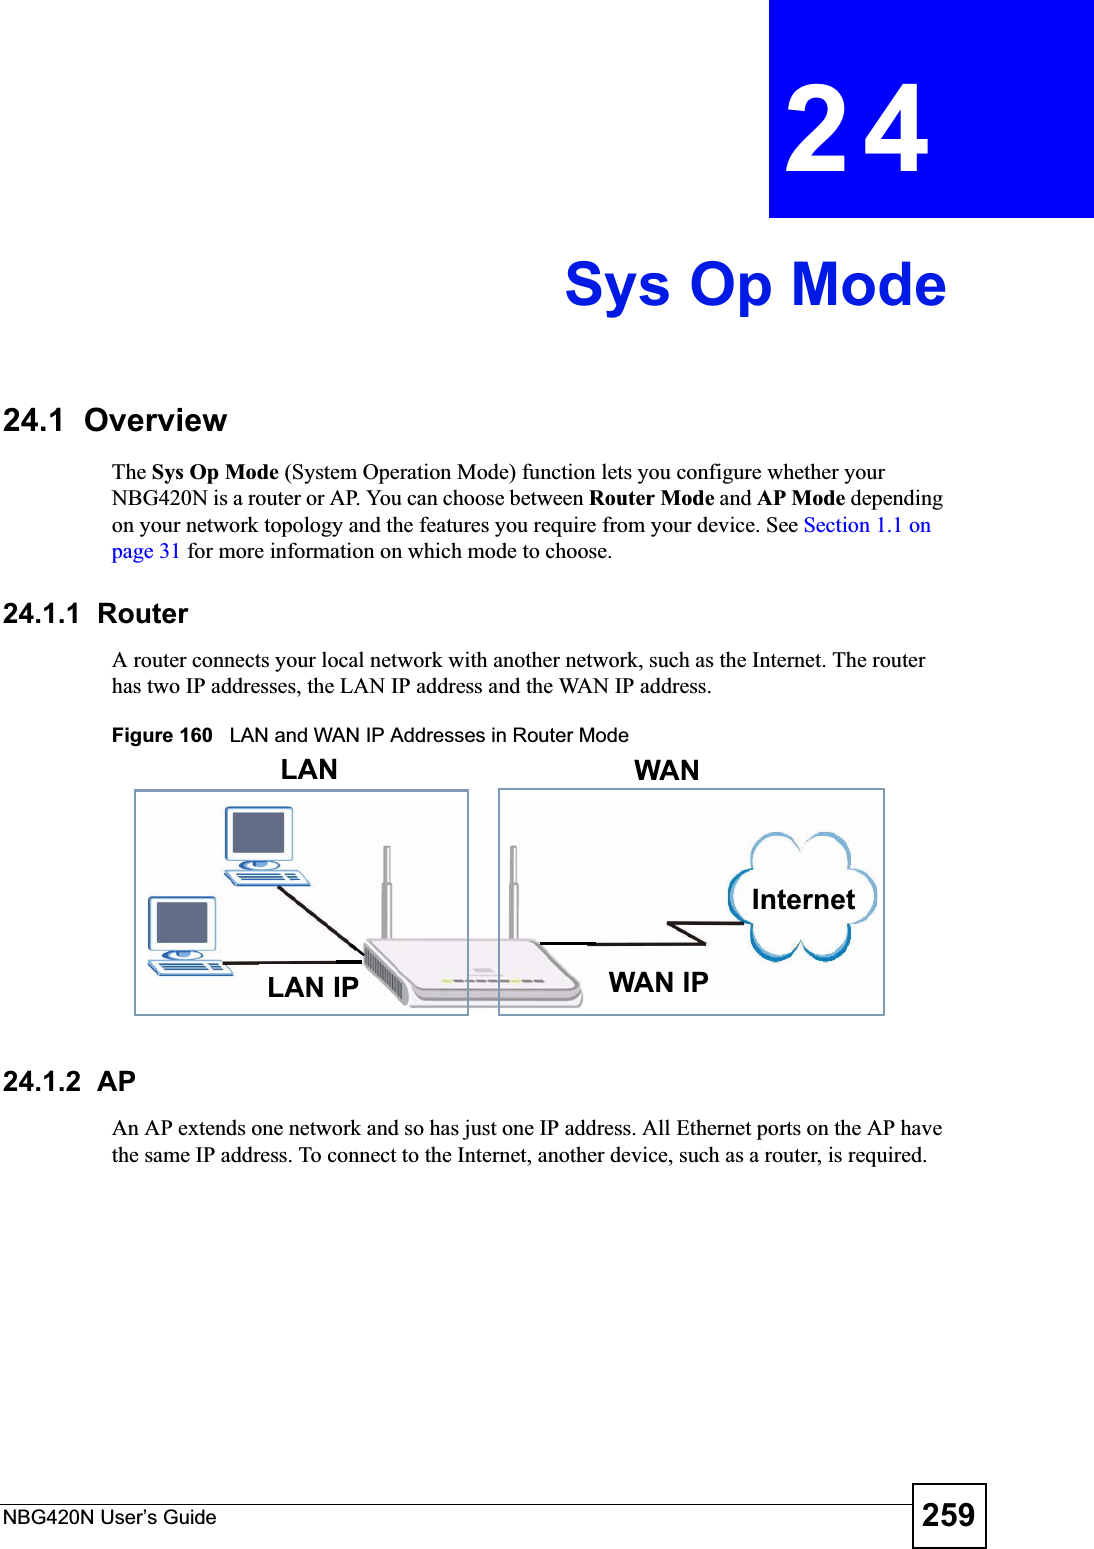 NBG420N User’s Guide 259CHAPTER 24Sys Op Mode24.1  OverviewThe Sys Op Mode (System Operation Mode) function lets you configure whether your NBG420N is a router or AP. You can choose between Router Mode and AP Mode depending on your network topology and the features you require from your device. See Section 1.1 on page 31 for more information on which mode to choose.24.1.1  Router A router connects your local network with another network, such as the Internet. The router has two IP addresses, the LAN IP address and the WAN IP address.Figure 160   LAN and WAN IP Addresses in Router Mode24.1.2  AP An AP extends one network and so has just one IP address. All Ethernet ports on the AP have the same IP address. To connect to the Internet, another device, such as a router, is required.WAN IPInternetLAN WANLAN IP